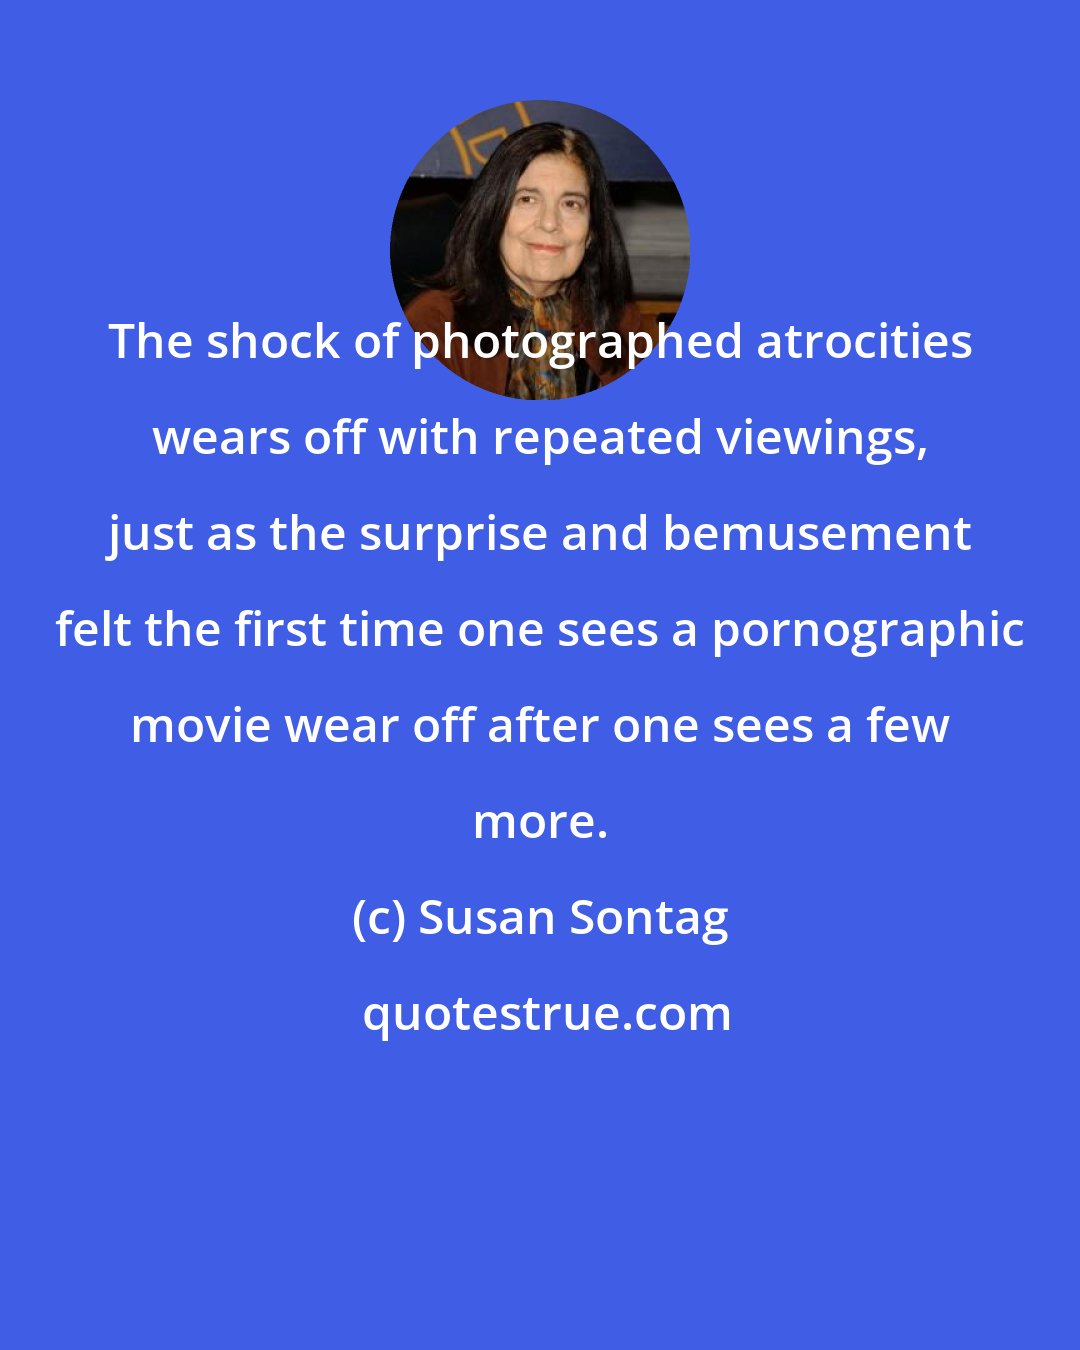 Susan Sontag: The shock of photographed atrocities wears off with repeated viewings, just as the surprise and bemusement felt the first time one sees a pornographic movie wear off after one sees a few more.